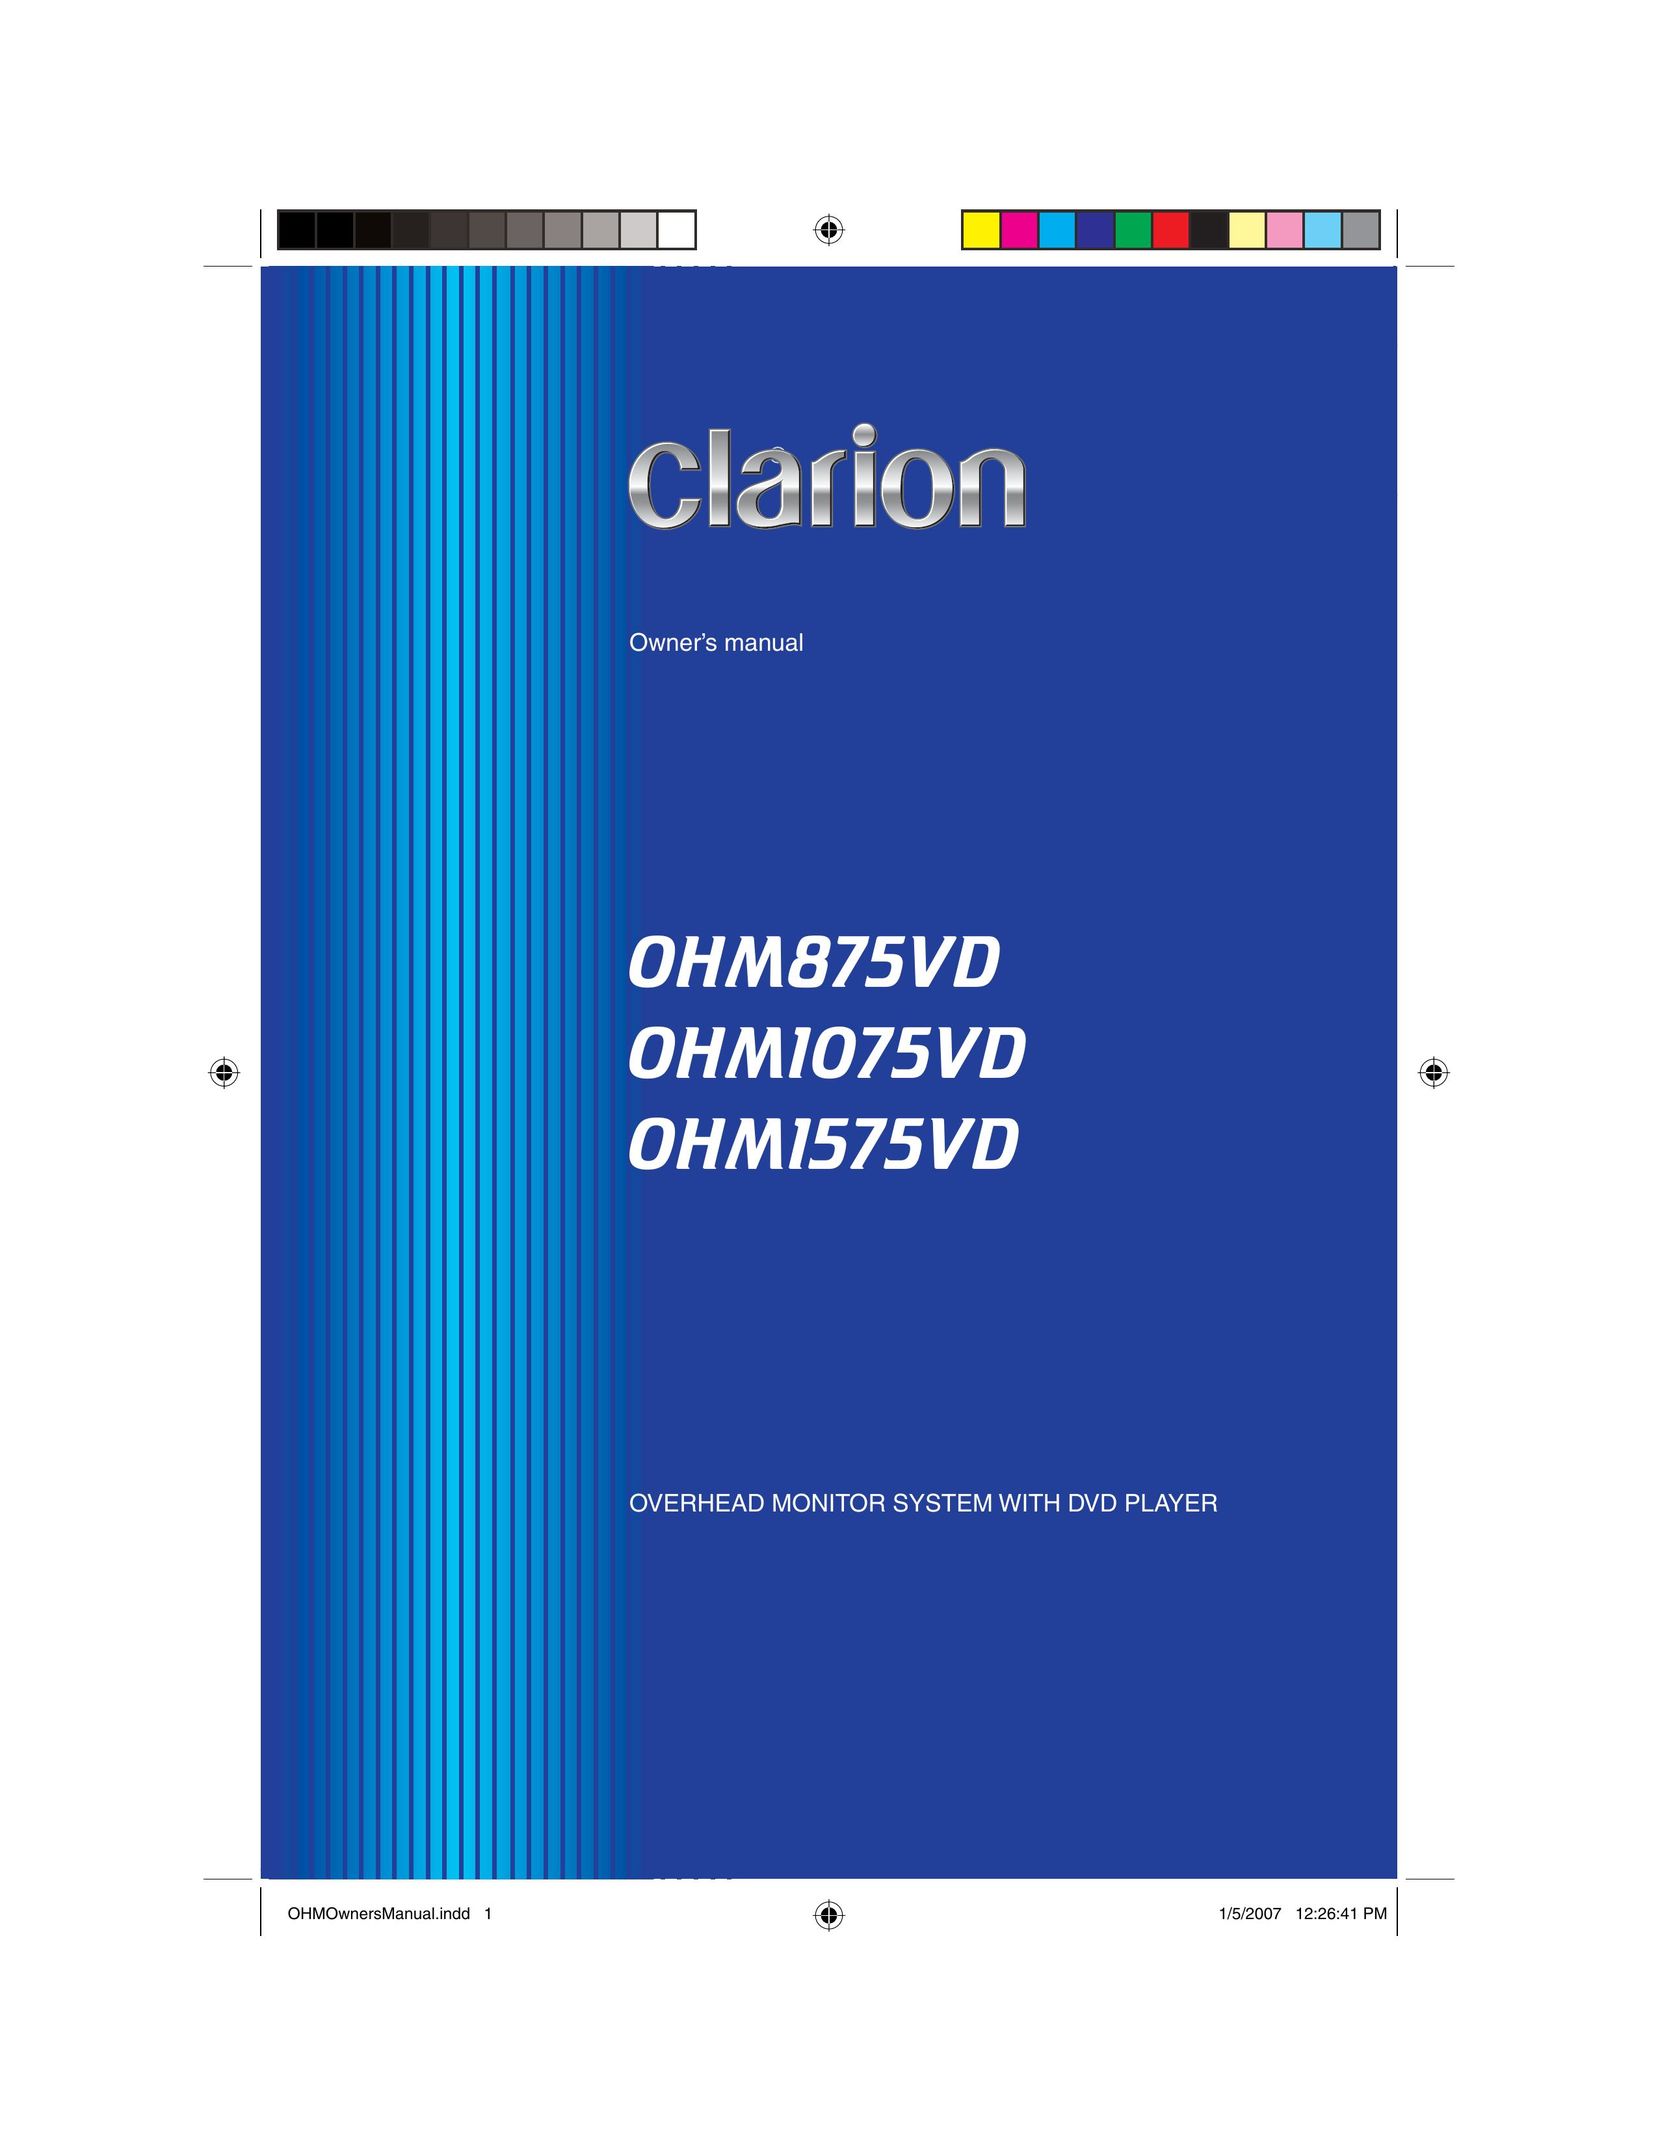 Clarion OHM875VD Car Video System User Manual